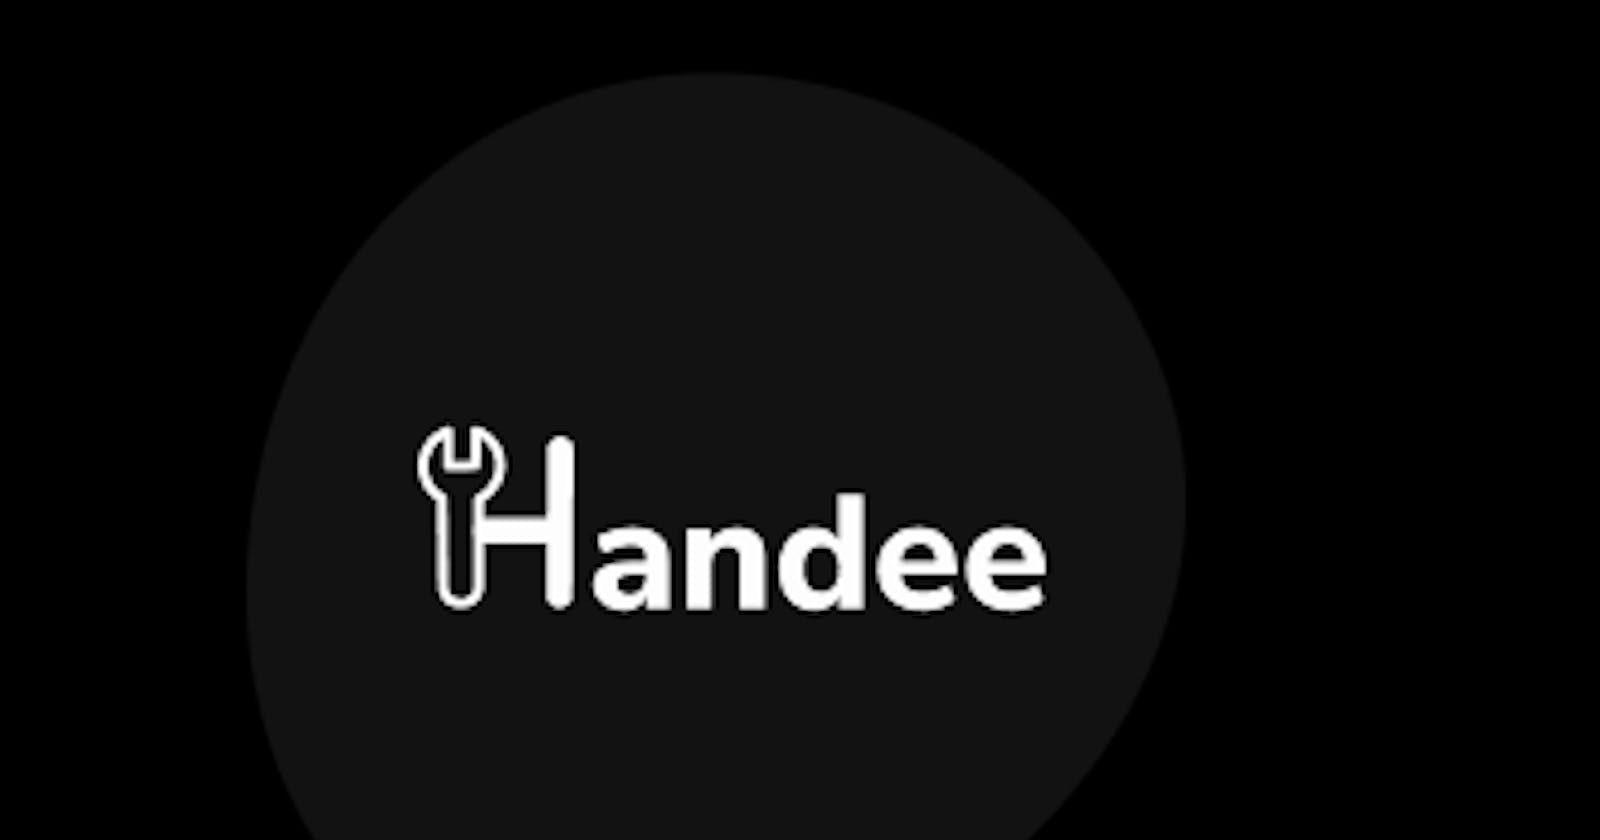 Introducing HandeeSpace - The "Uber" For Service Providers